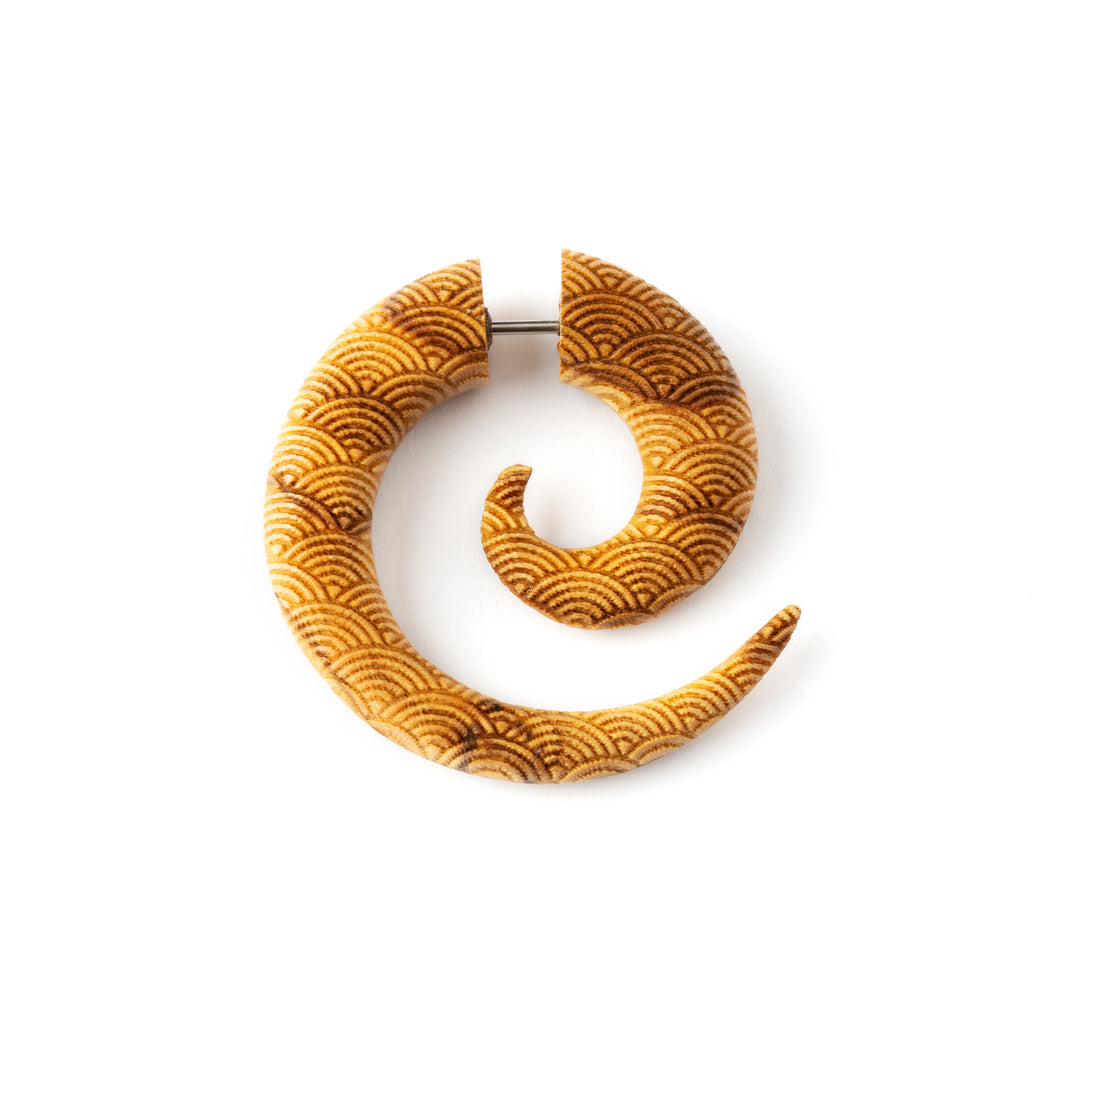 Wood with waves patters spiral earring side view